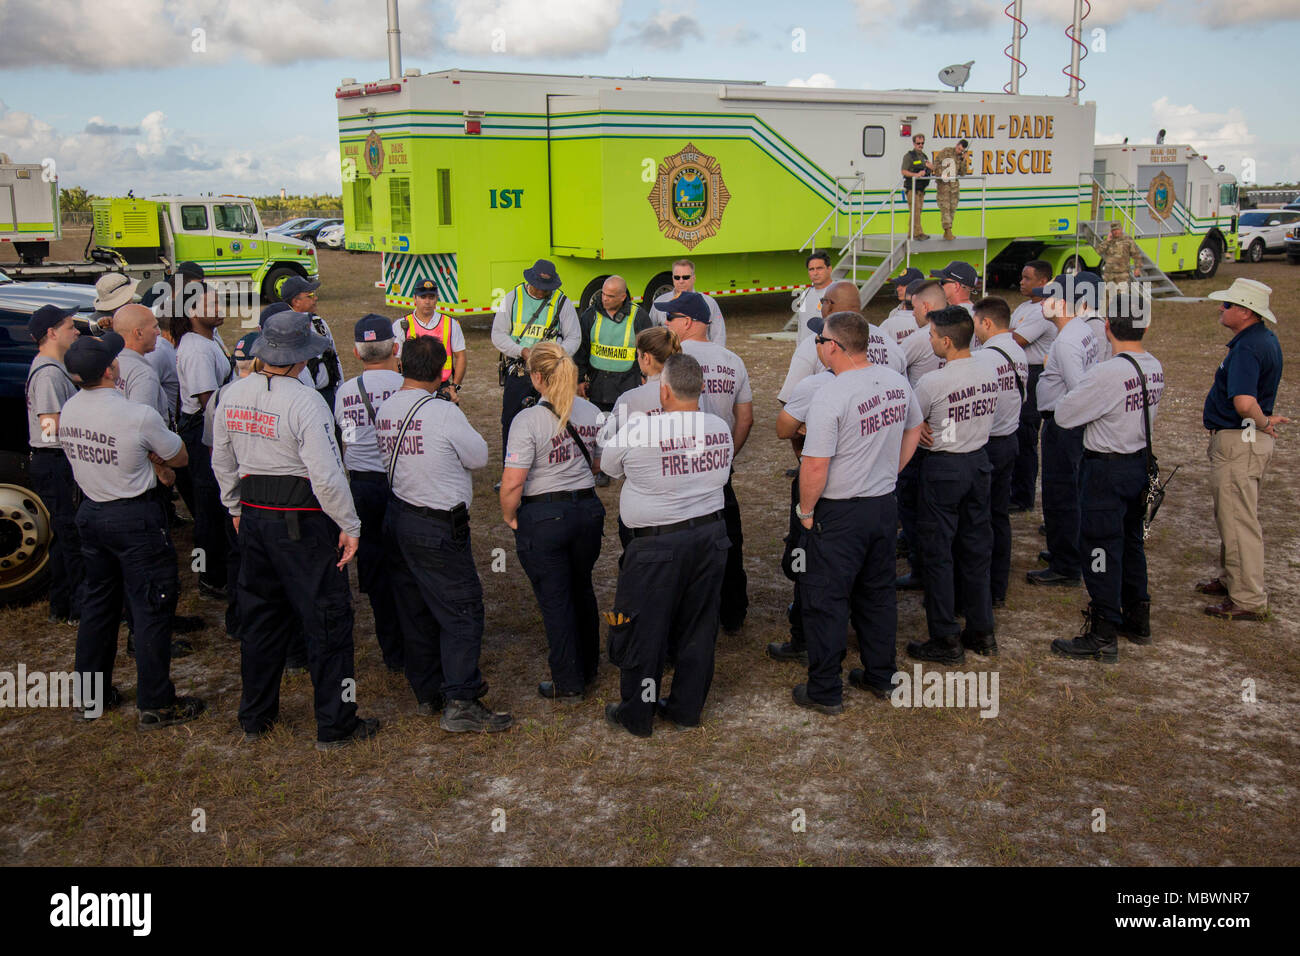 Miami-Dade Fire Department Hazmat members, discuss about the simulated mass chemical attack during a Joint Training Exercise hosted by the Miami-Dade Fire Department and Homestead-Miami Speedway in Miami, Fla. Jan. 11, 2018. This JTE focused on building response capabilities and seamless the transition between the local first responders and the follow-on support provided by the National Guard and Active duty soldiers. (U. S. Army Photo by Spc. P.J. Siquig) Stock Photo